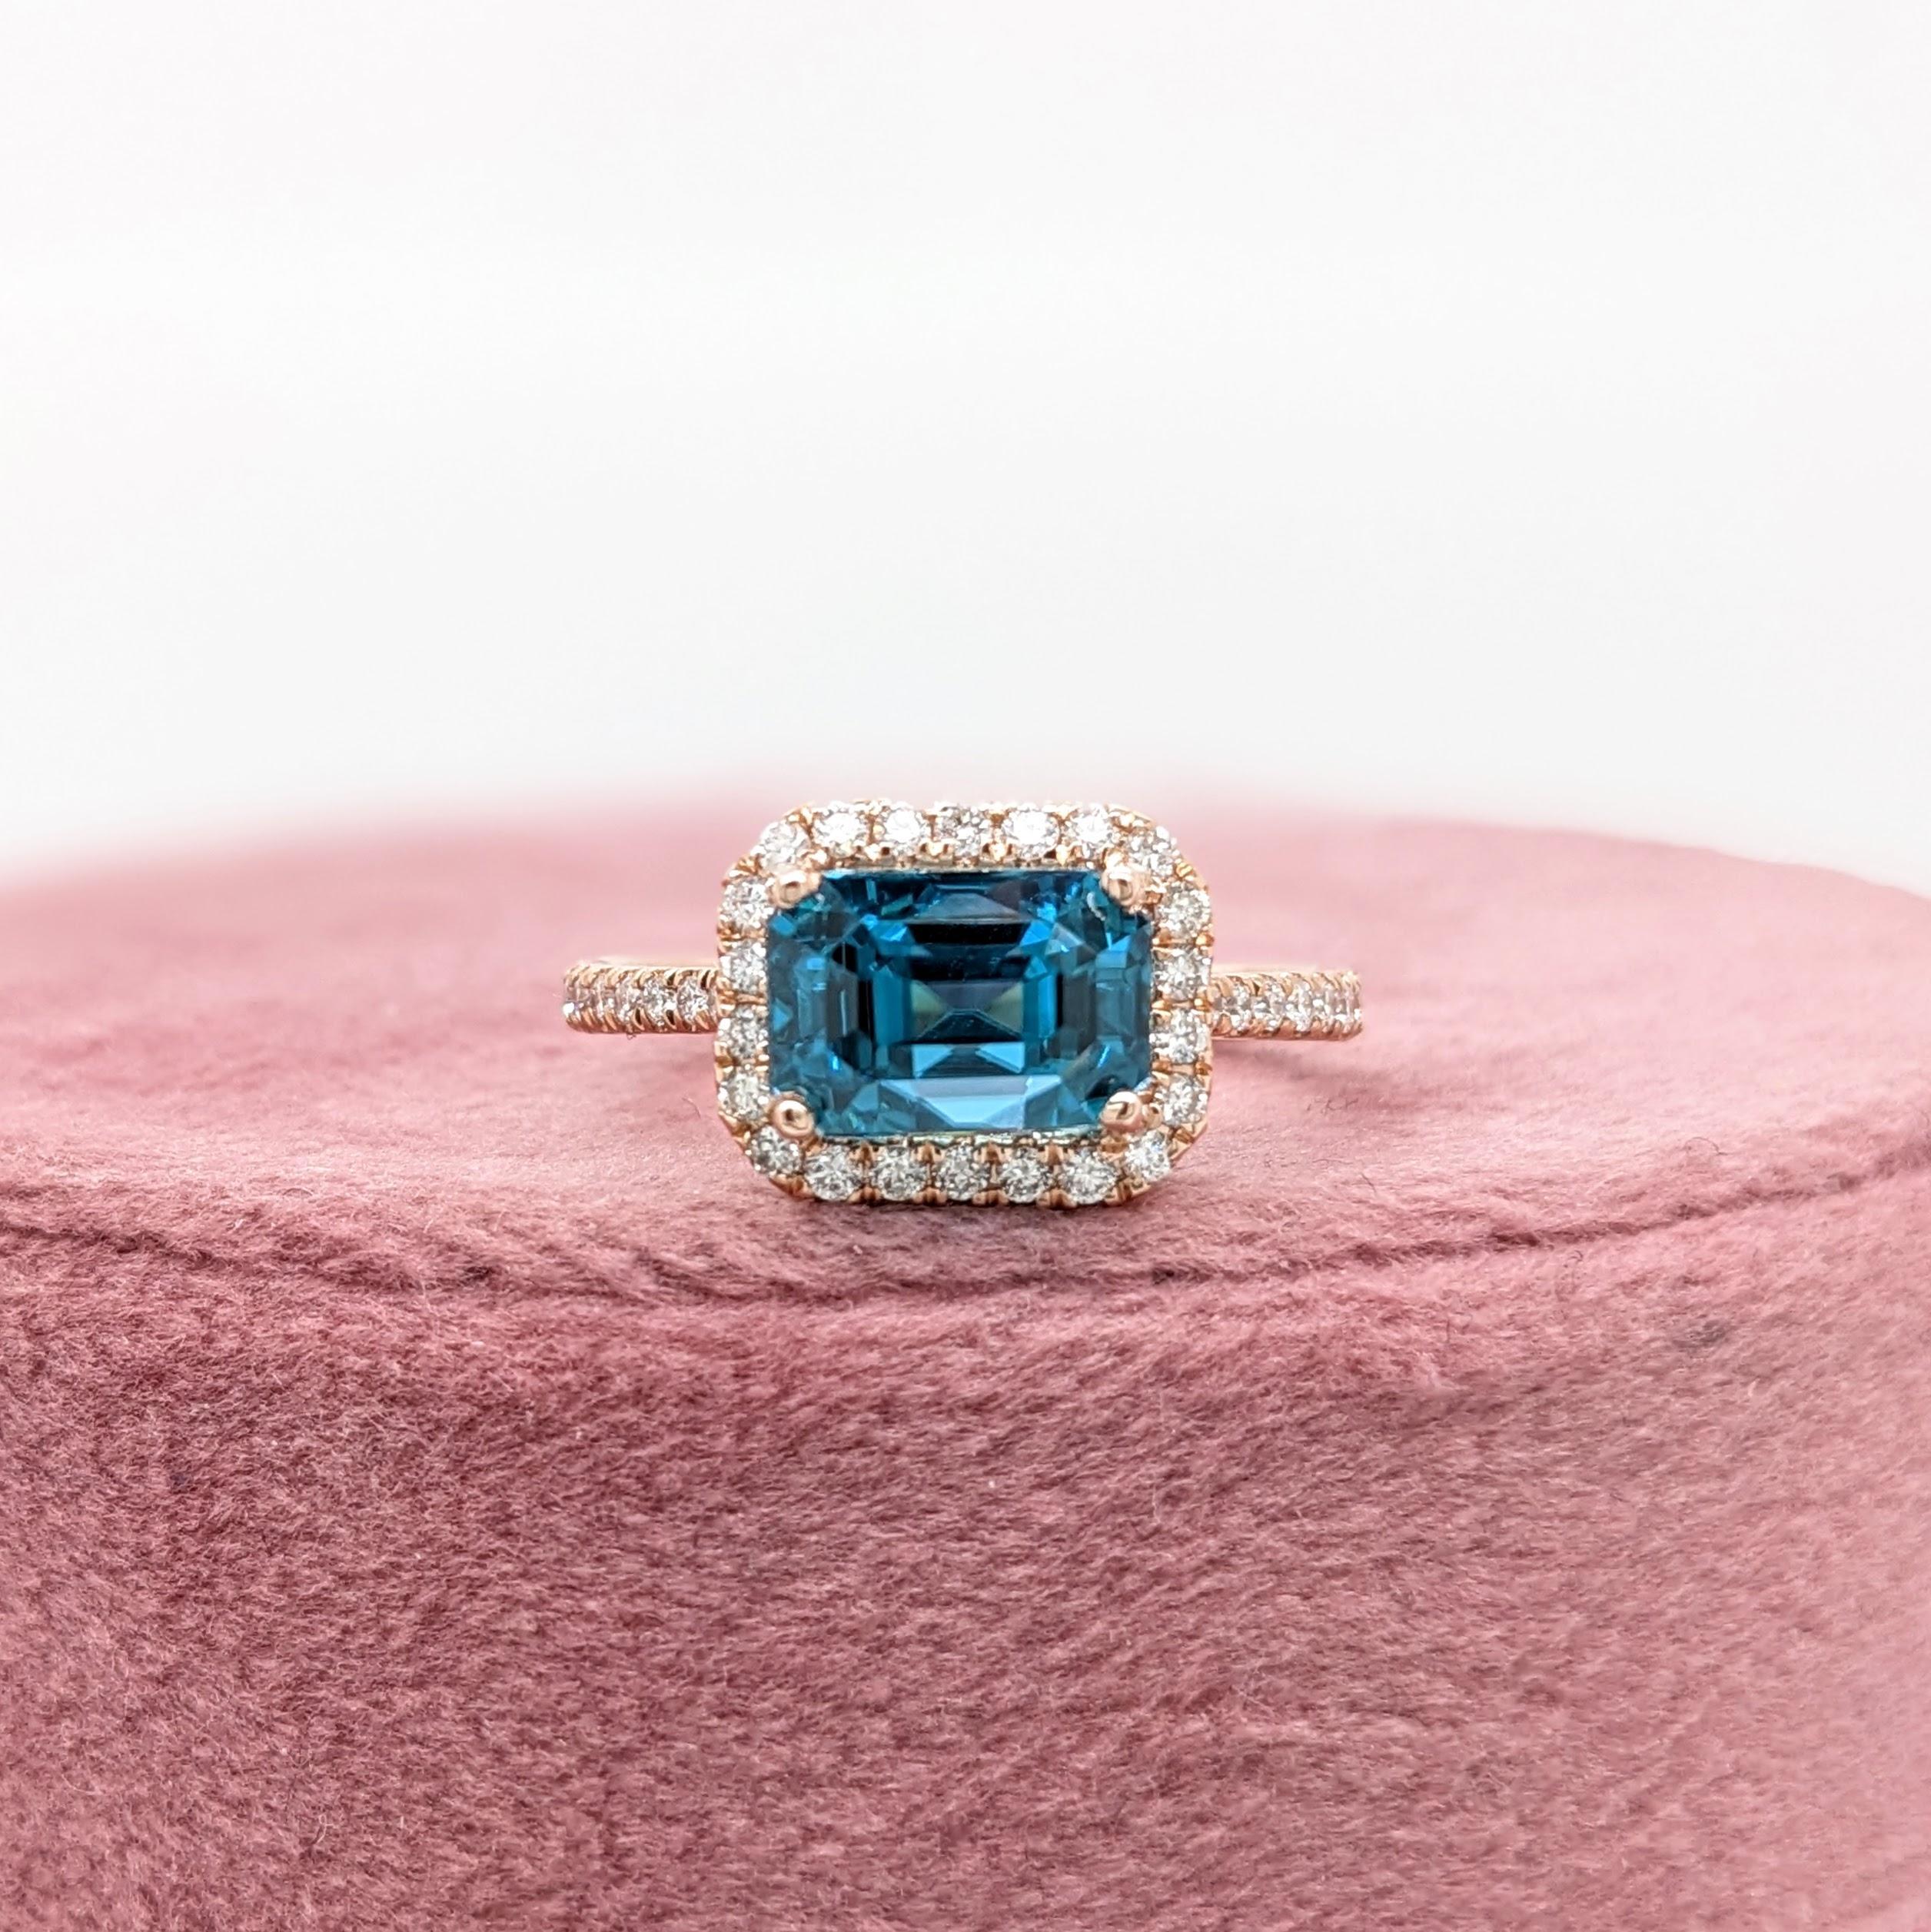 Emerald Cut 4.5ct Blue Zircon East West Ring w Natural Diamonds in Solid 14K Gold EM 8x6mm For Sale